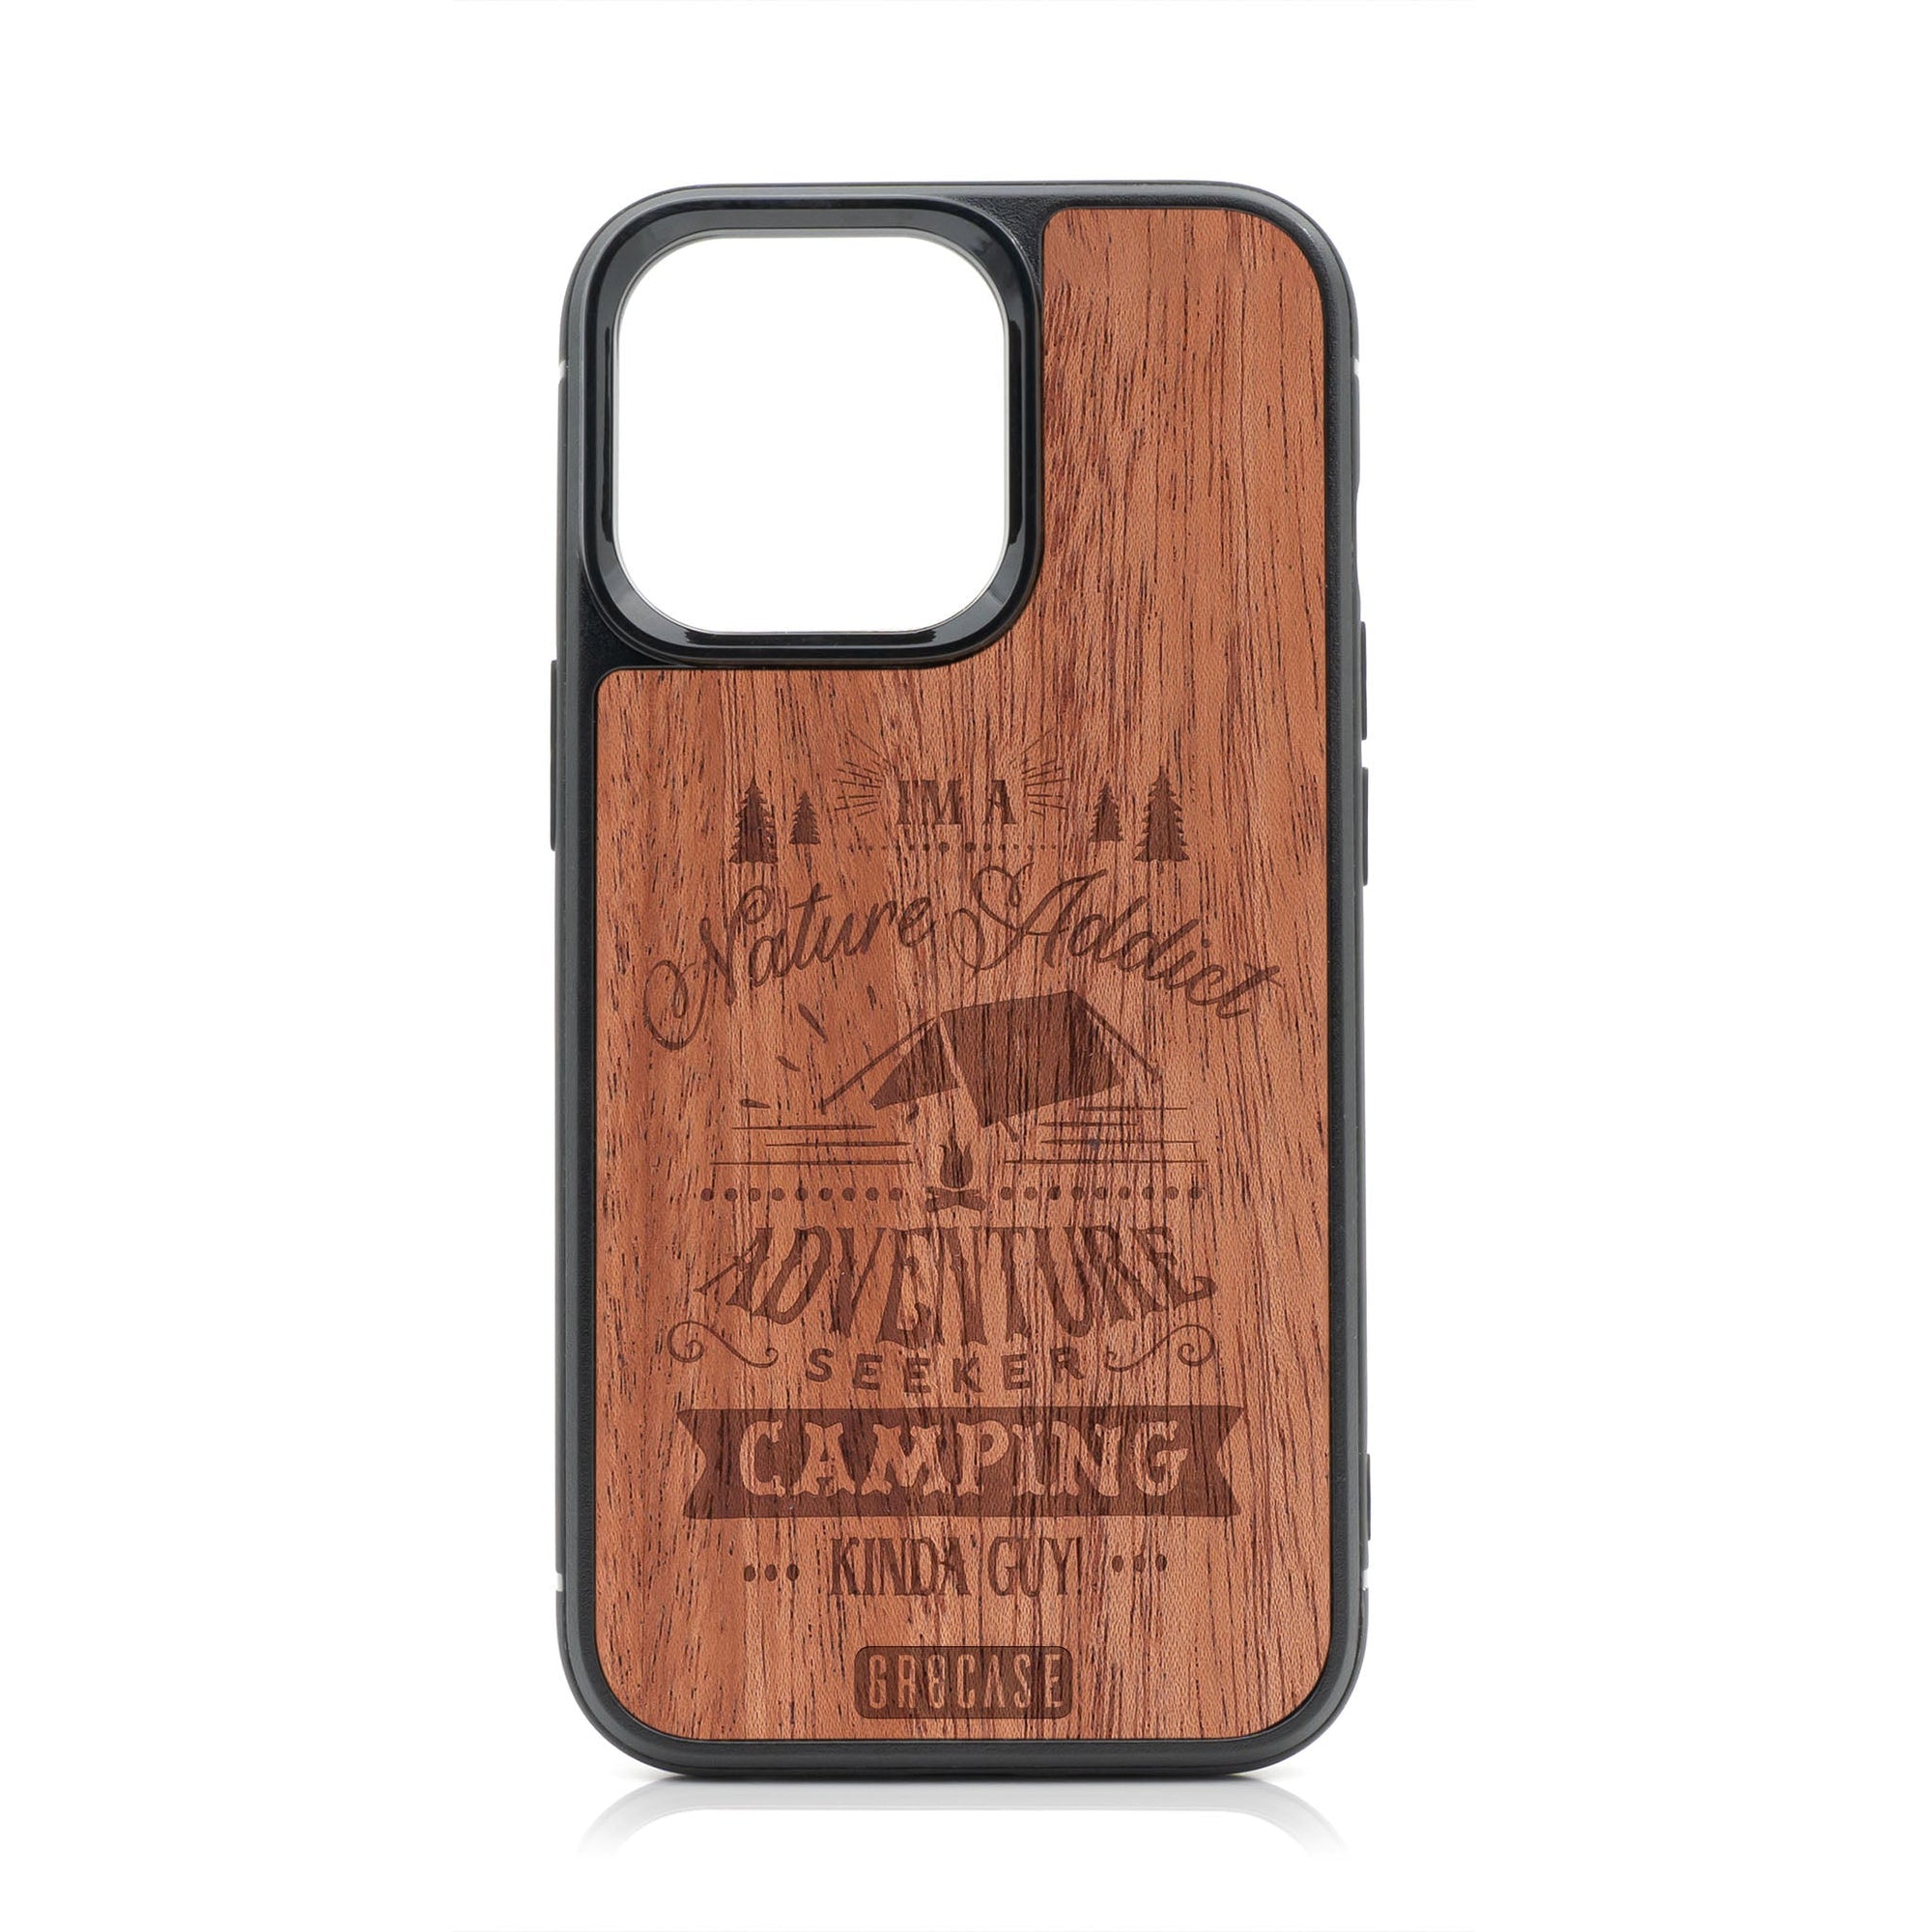 I'm A Nature Addict Adventure Seeker Camping Kinda Guy Design Wood Case For iPhone 14 Pro